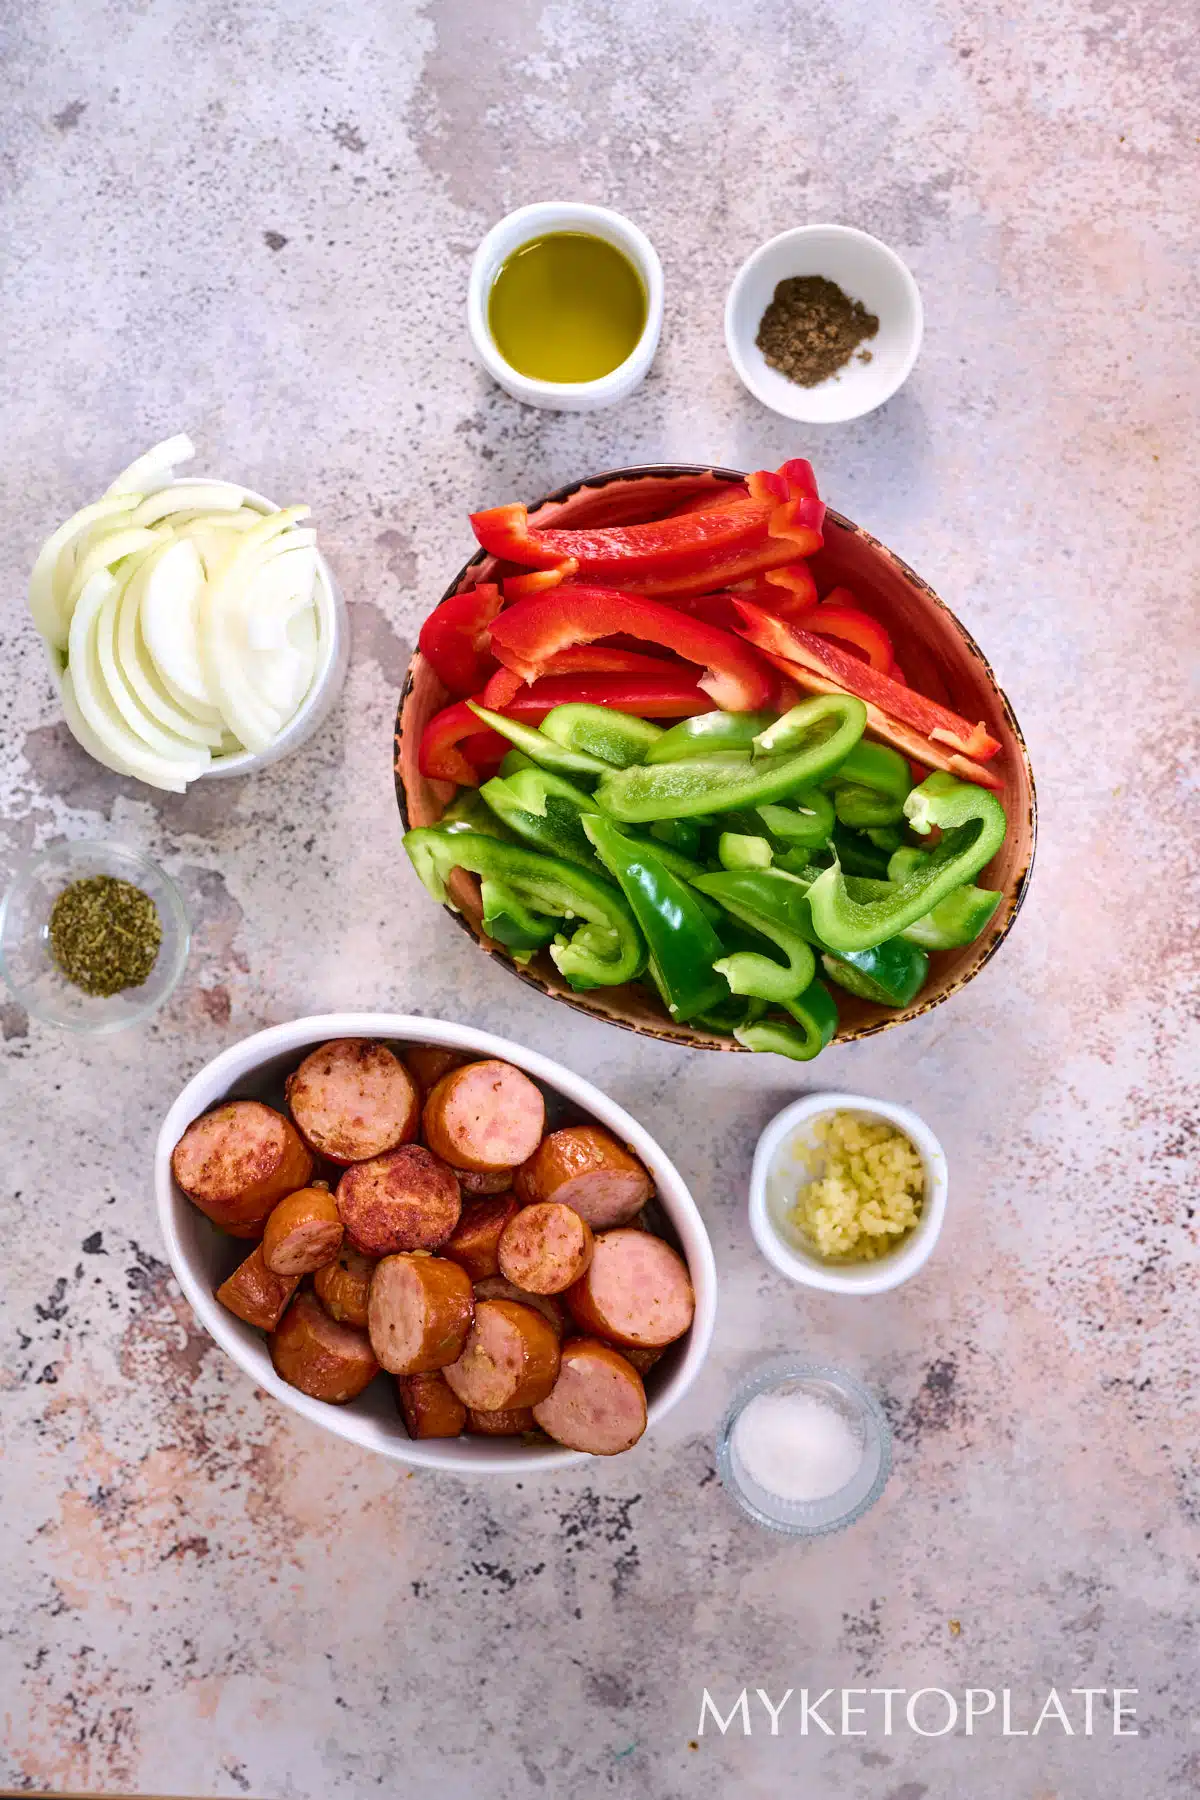 Smoked Sausage and Peppers Skillet Ingredients